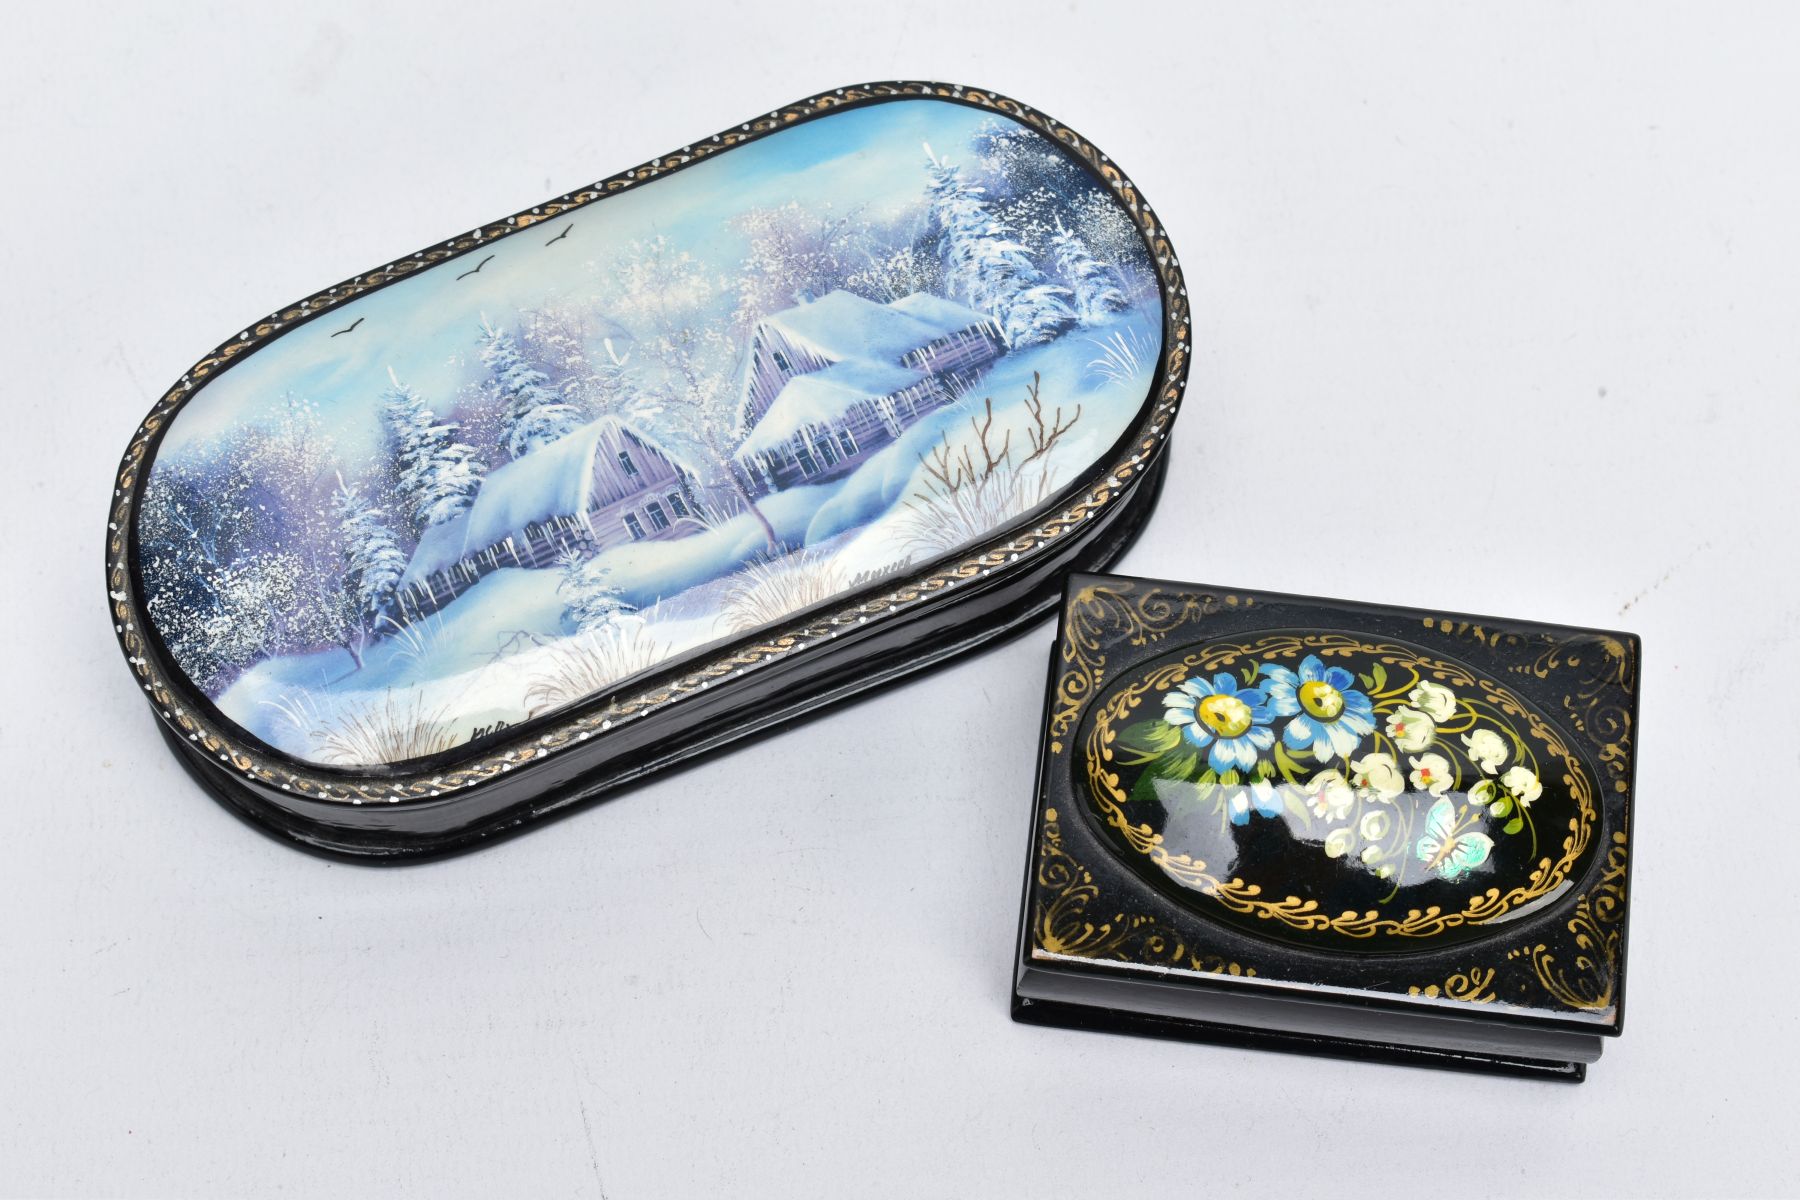 TWO DECORATIVE WOODEN TRINKET BOXES, the first of an elongated oval form, decorated with a painted